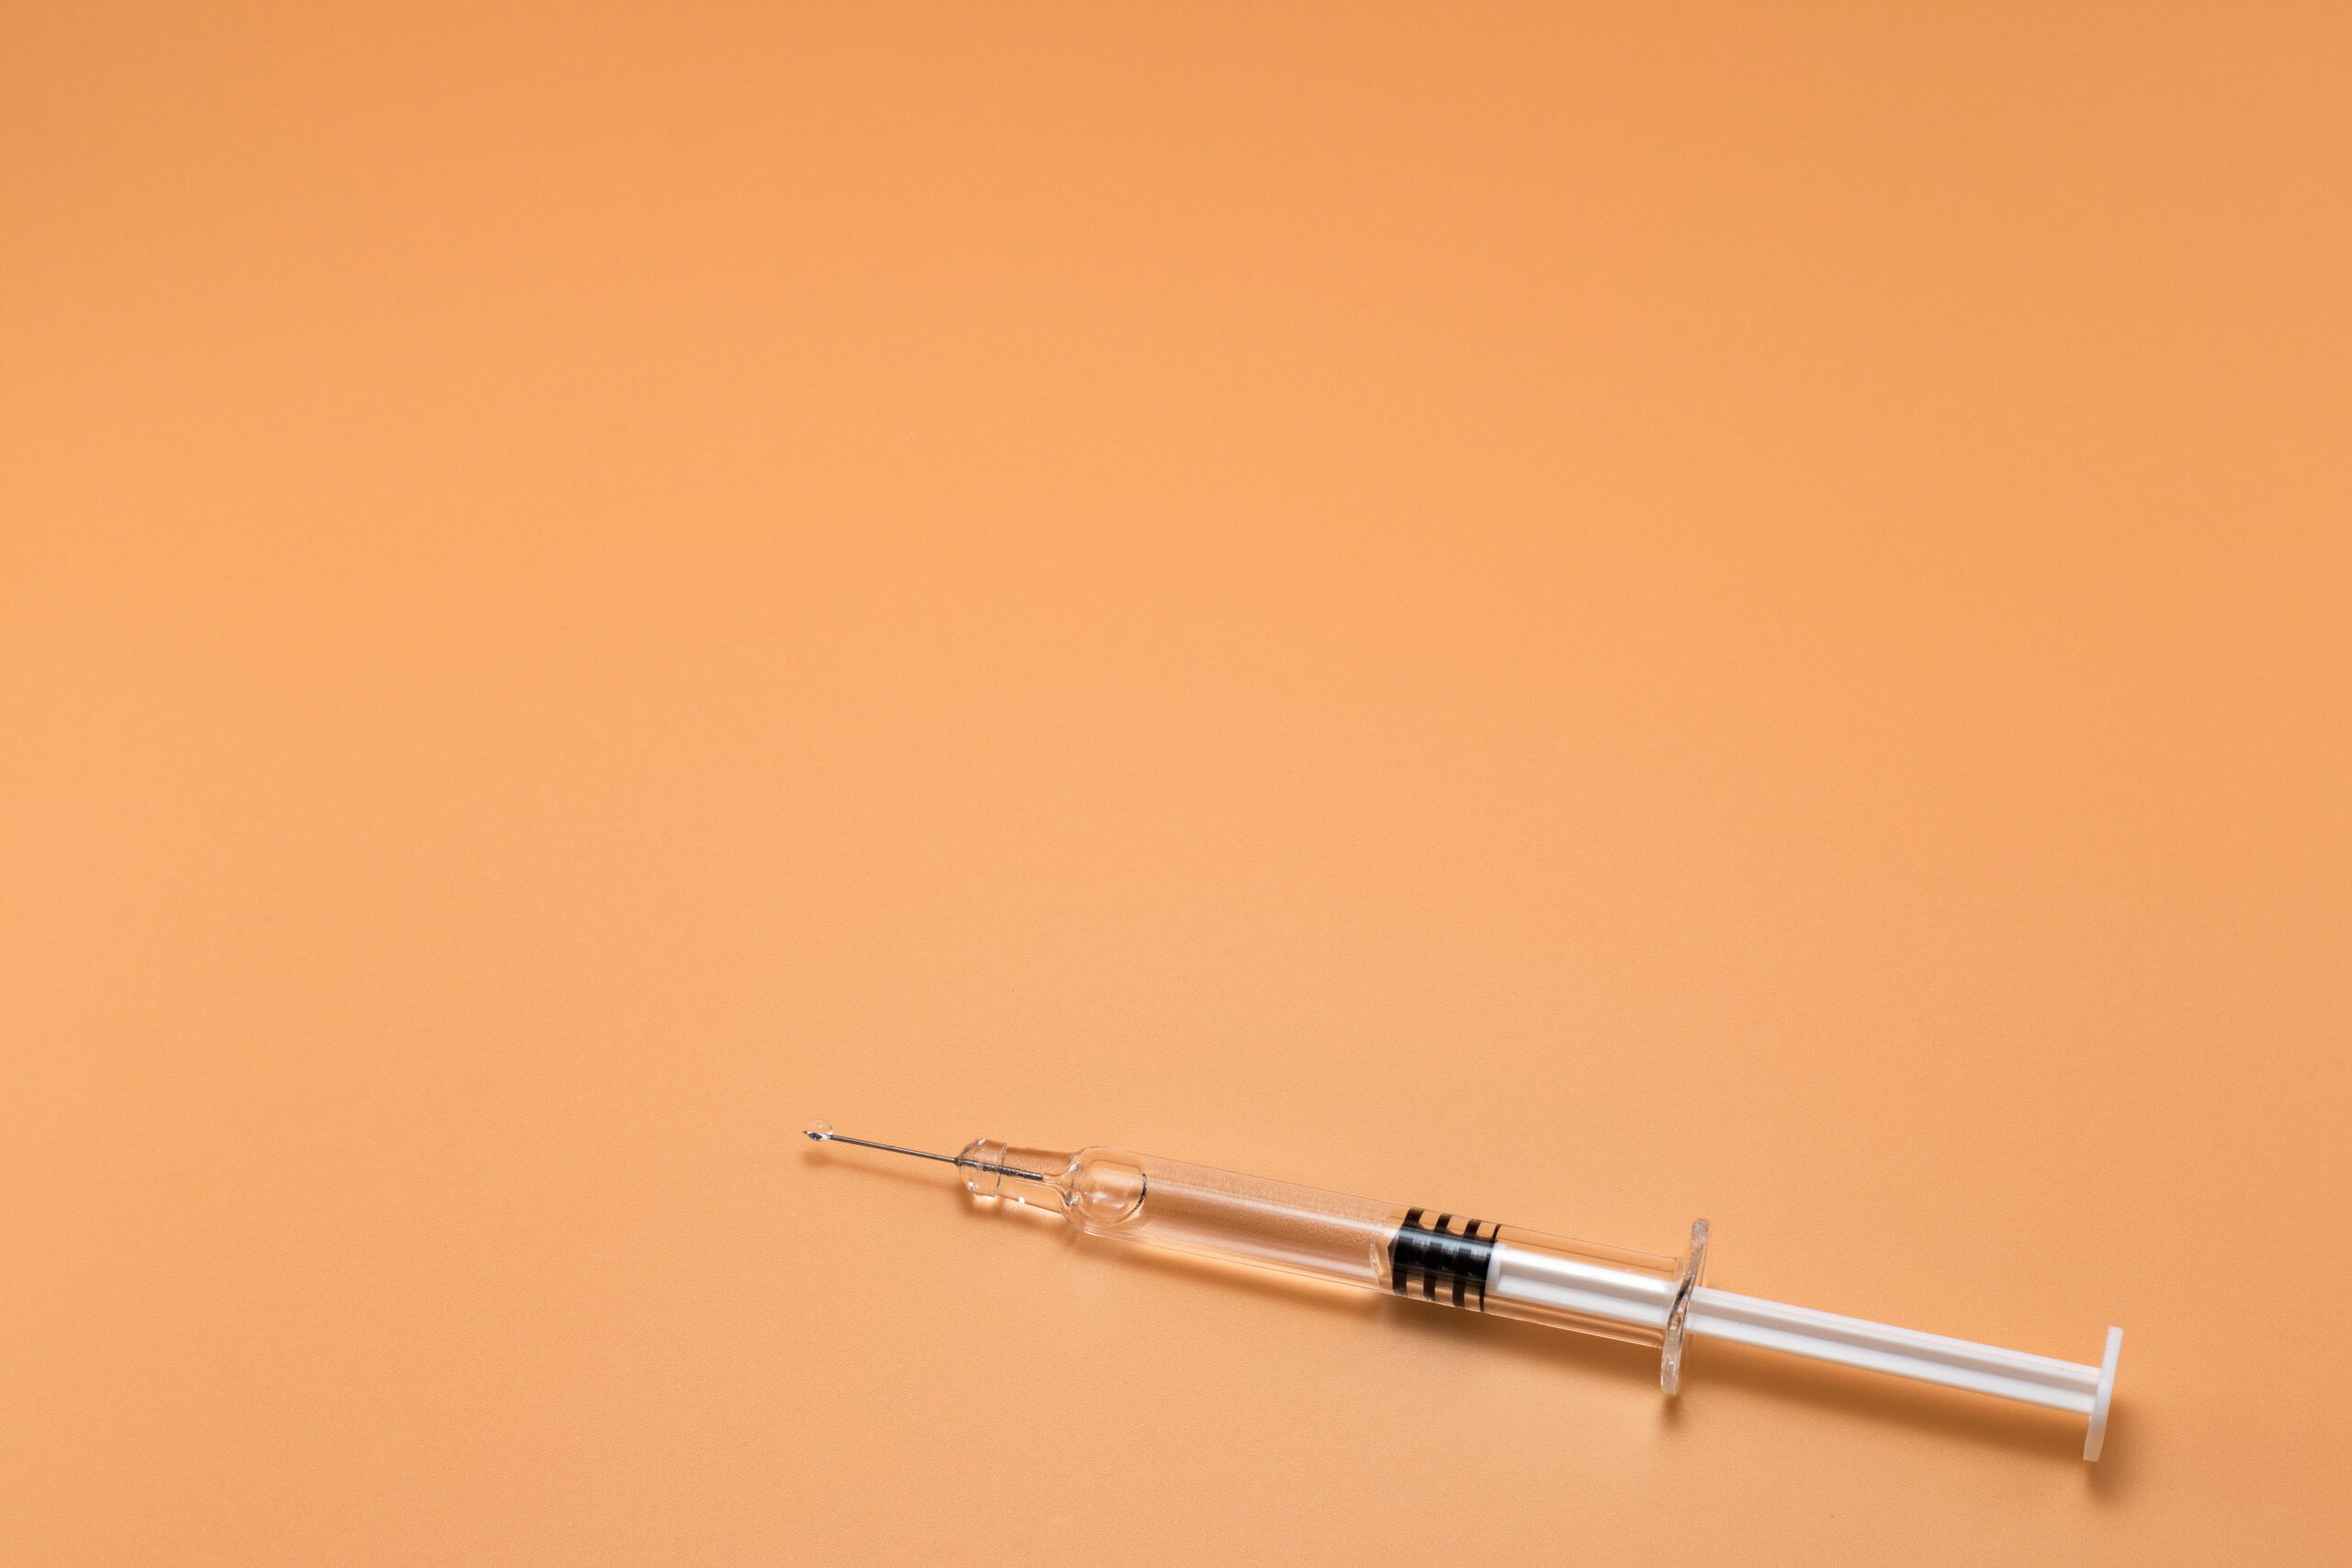 Small full syringe with needle on peach background. Copy Space.